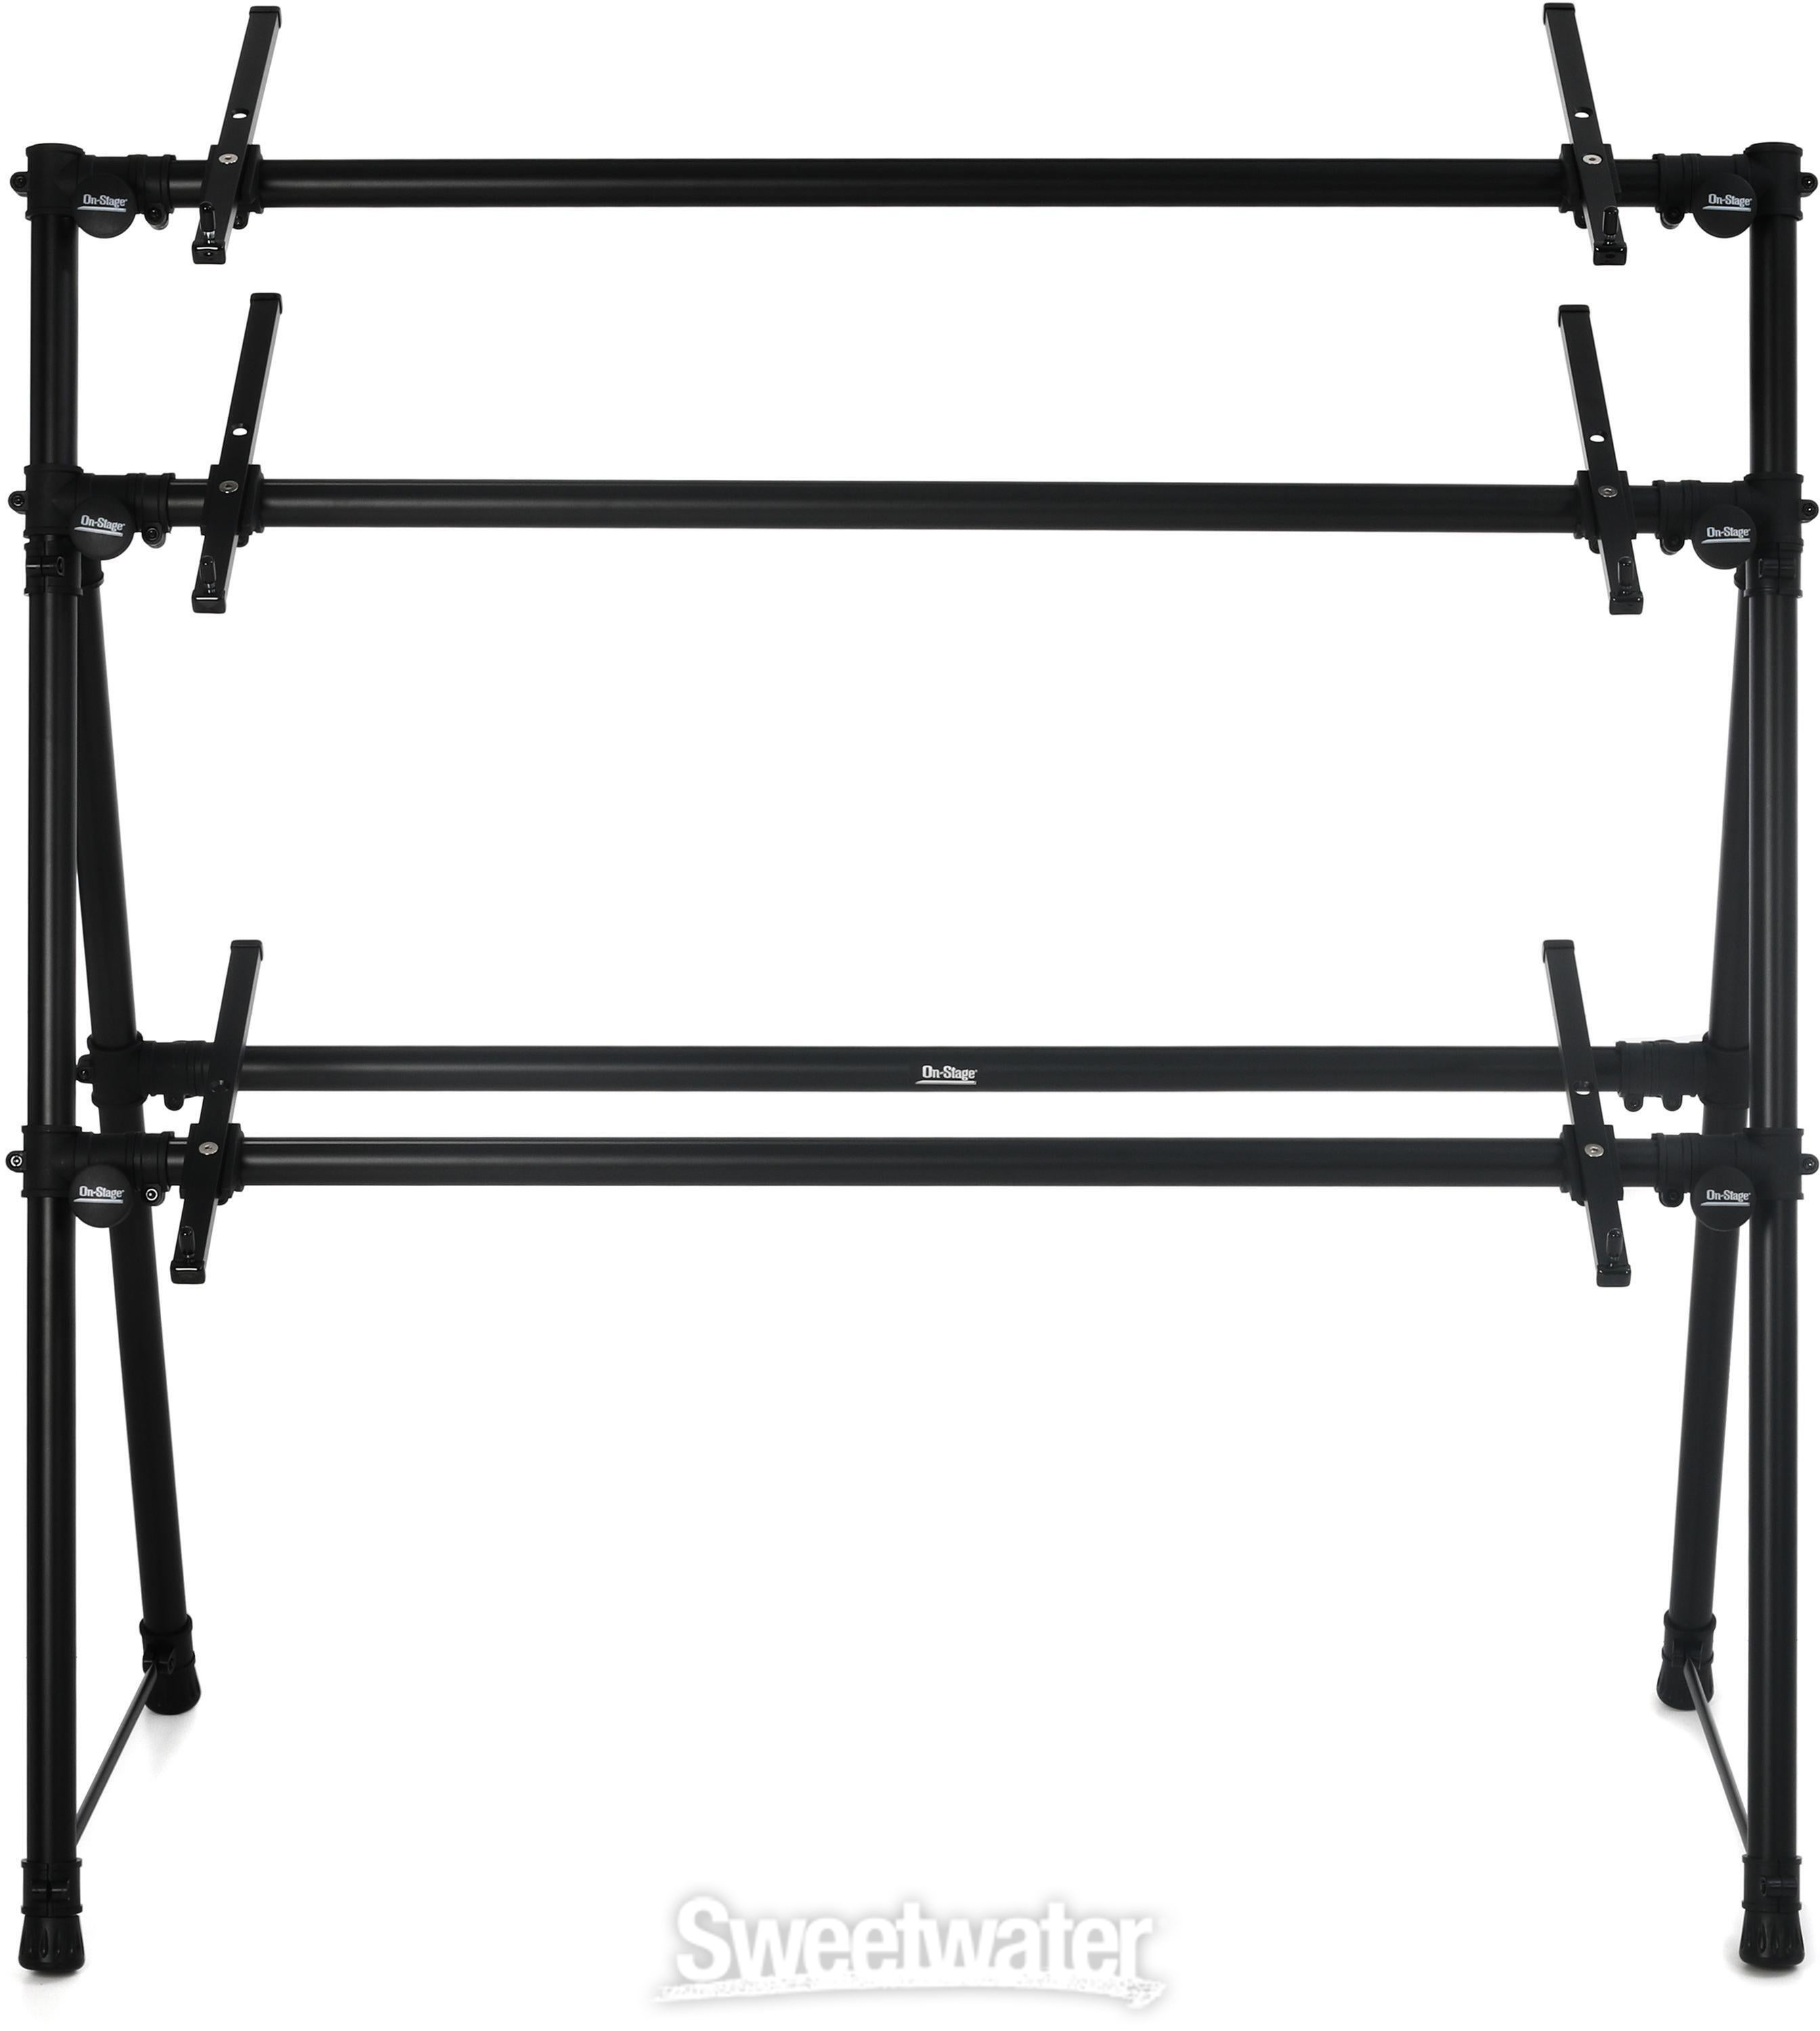 On-Stage KS7903 3-Tier A-Frame Keyboard Stand Reviews | Sweetwater